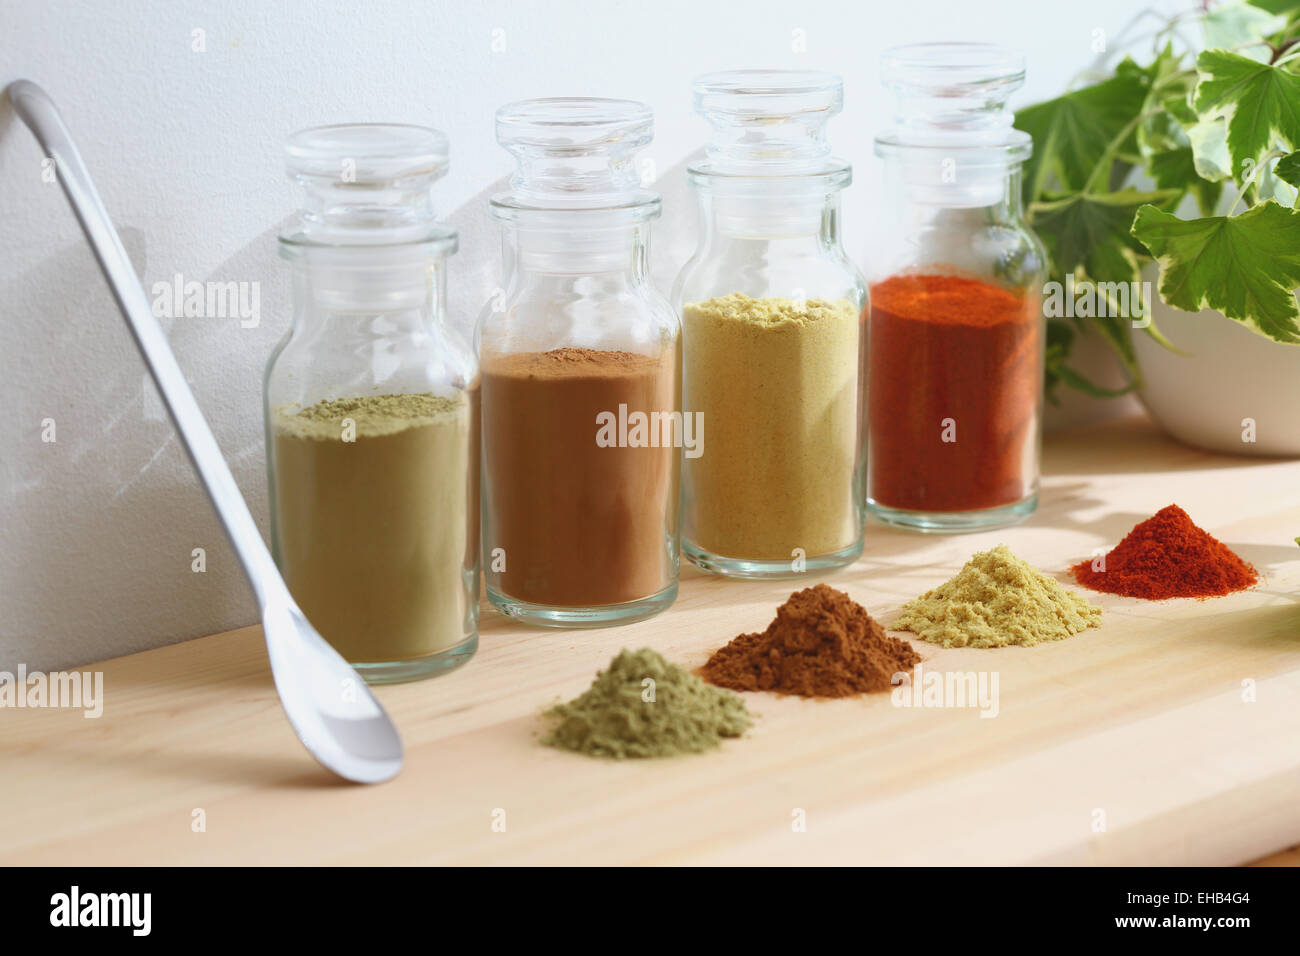 Assorted spices Stock Photo